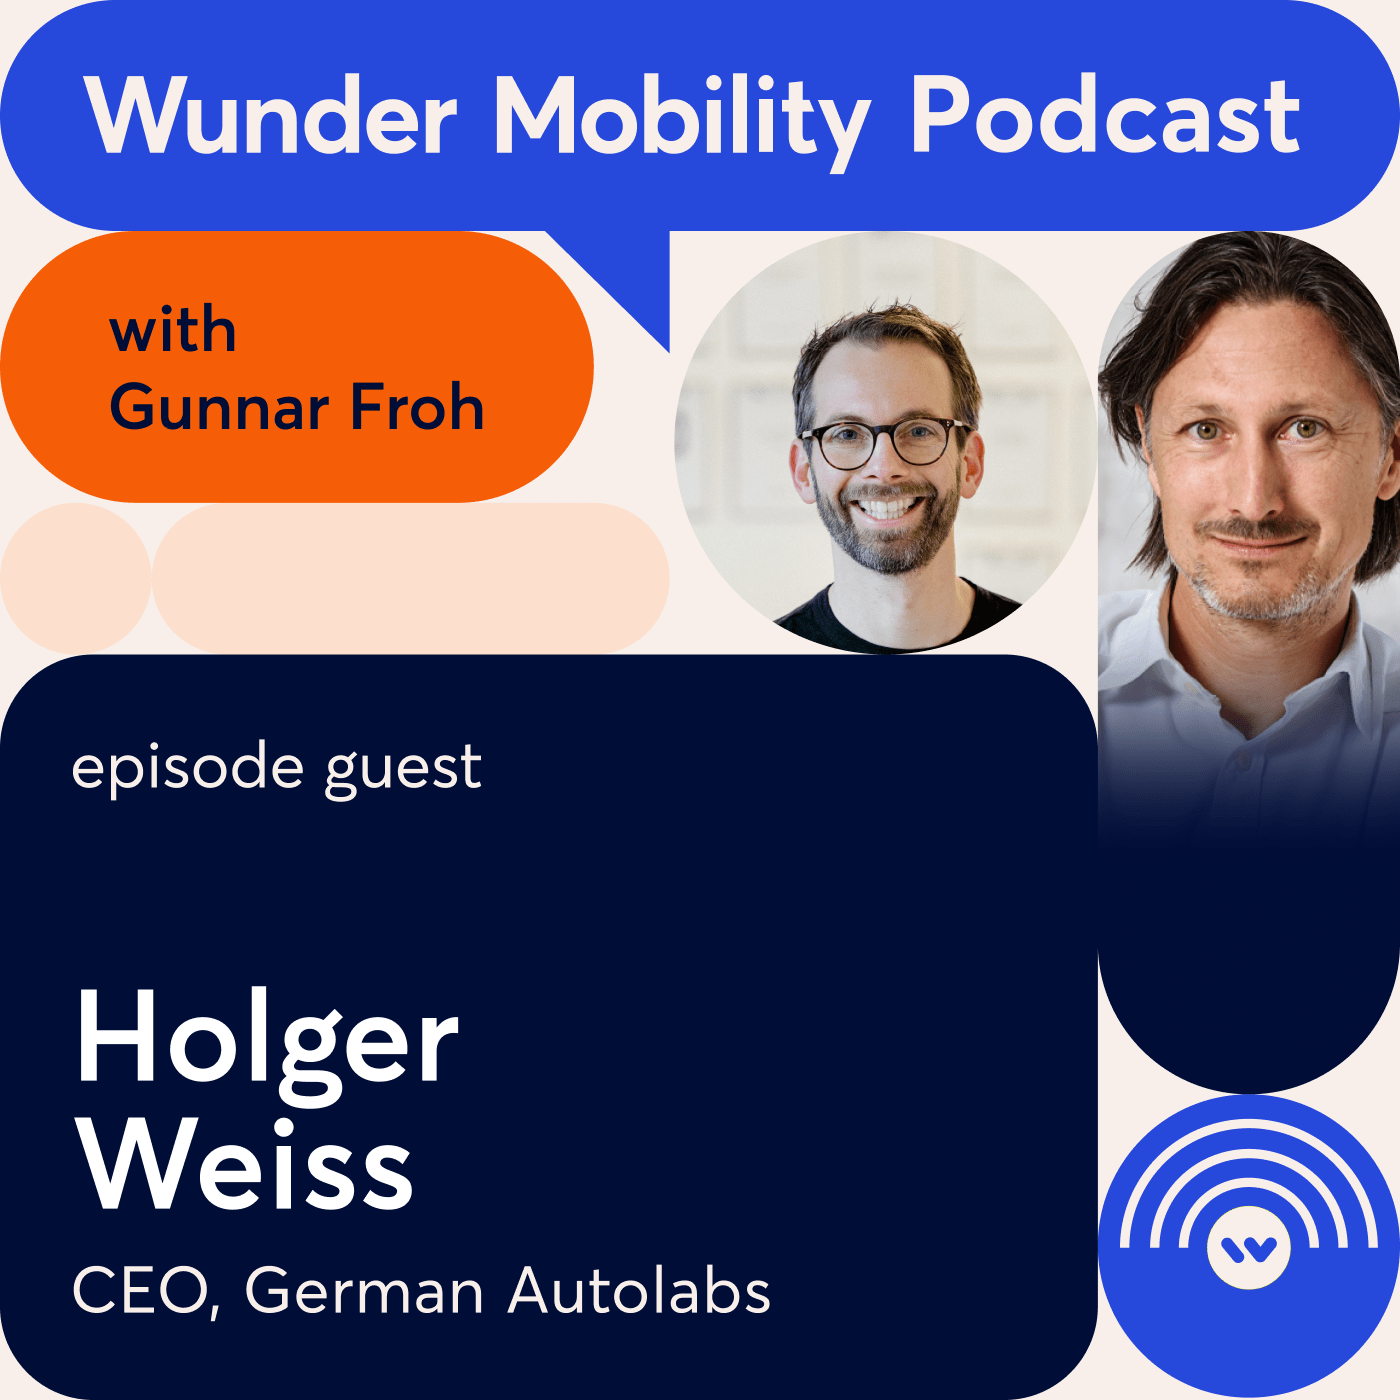 #9: Holger Weiss, CEO, German Autolabs